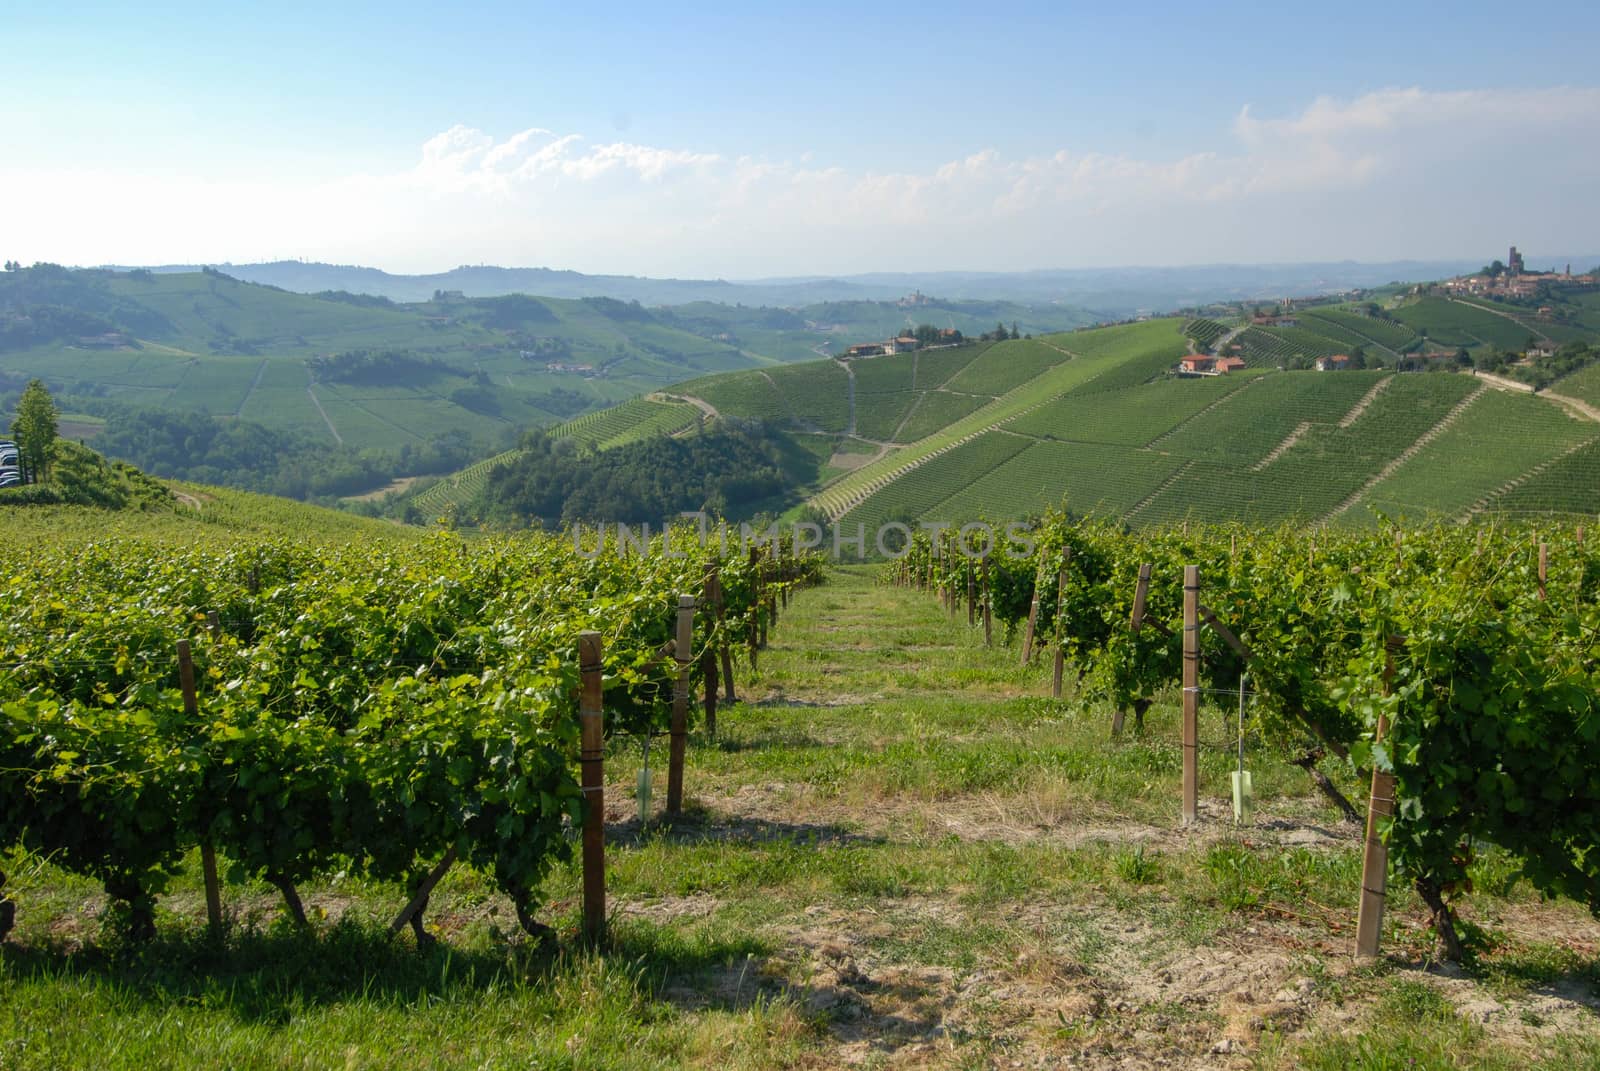 Vineyards on the hills of the Langhe, Piedmont - Italy